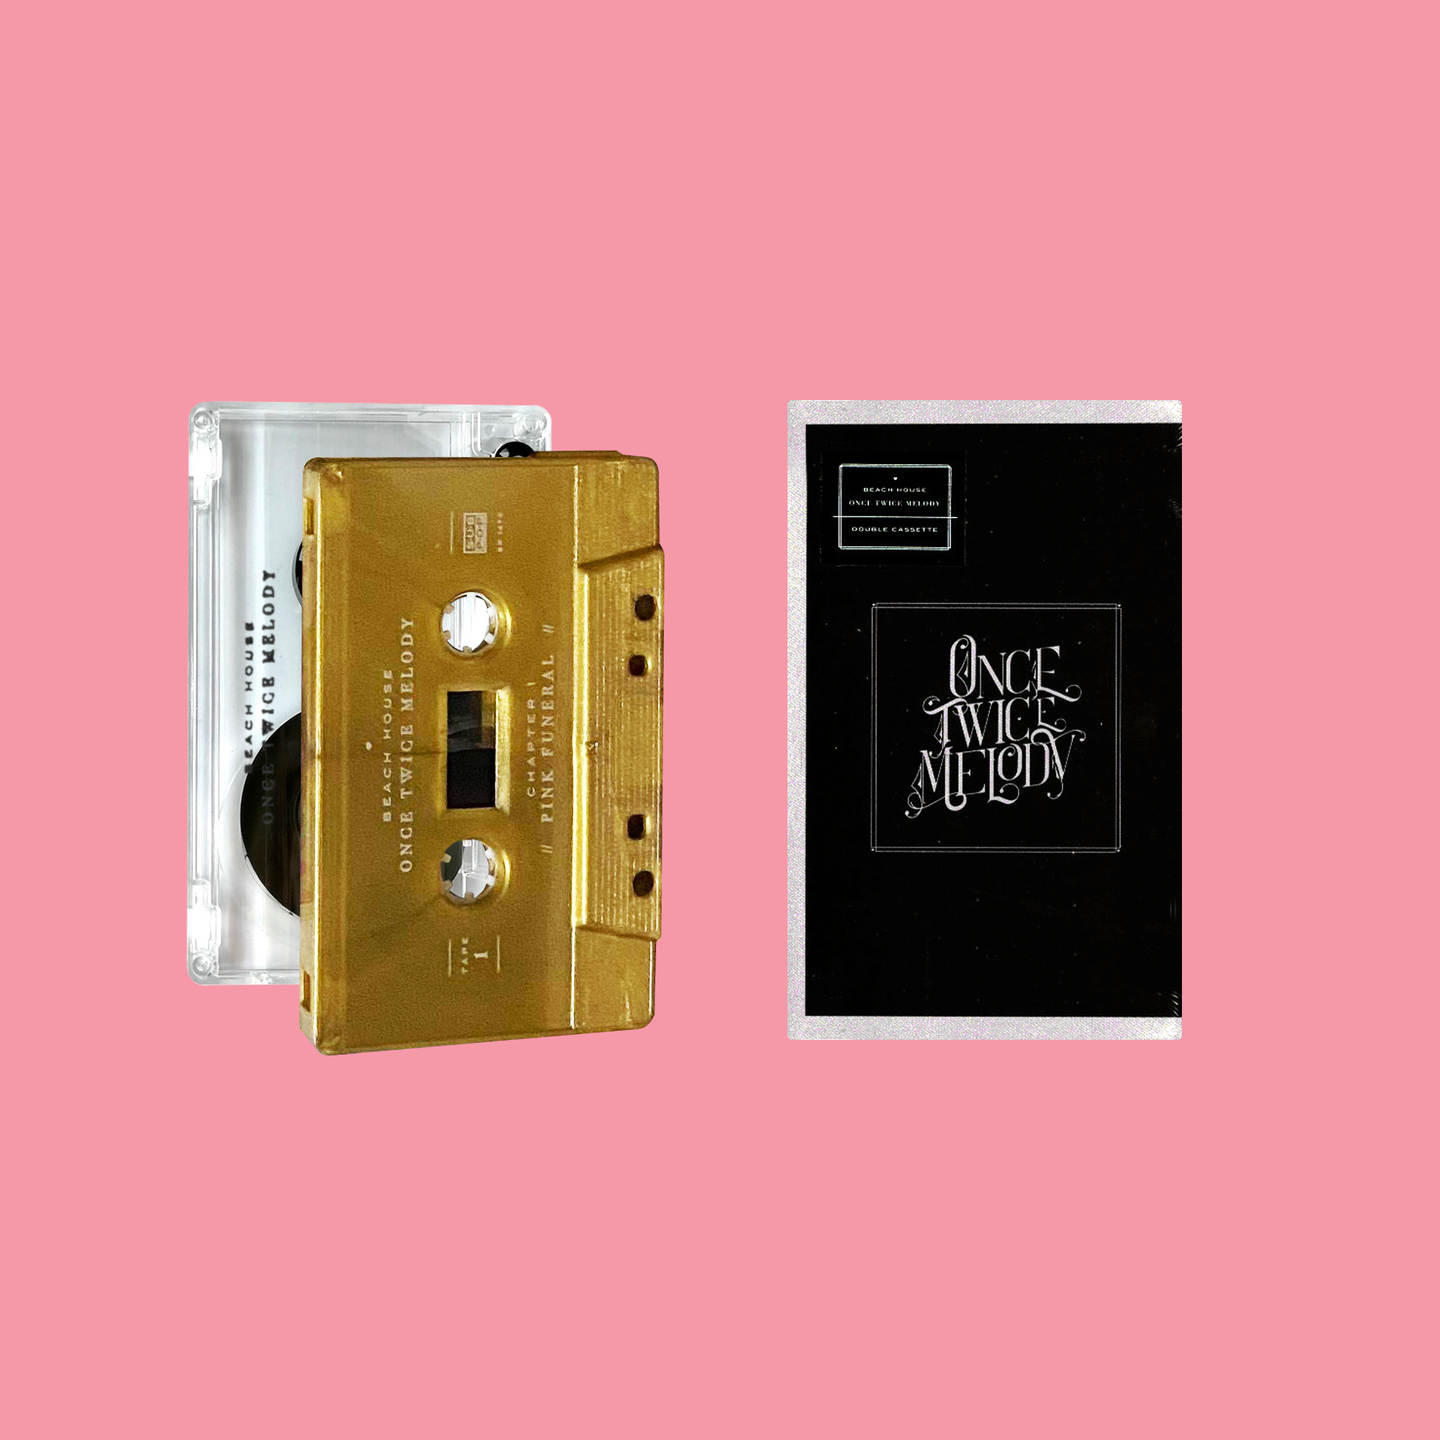 Once Twice Melody Cassette